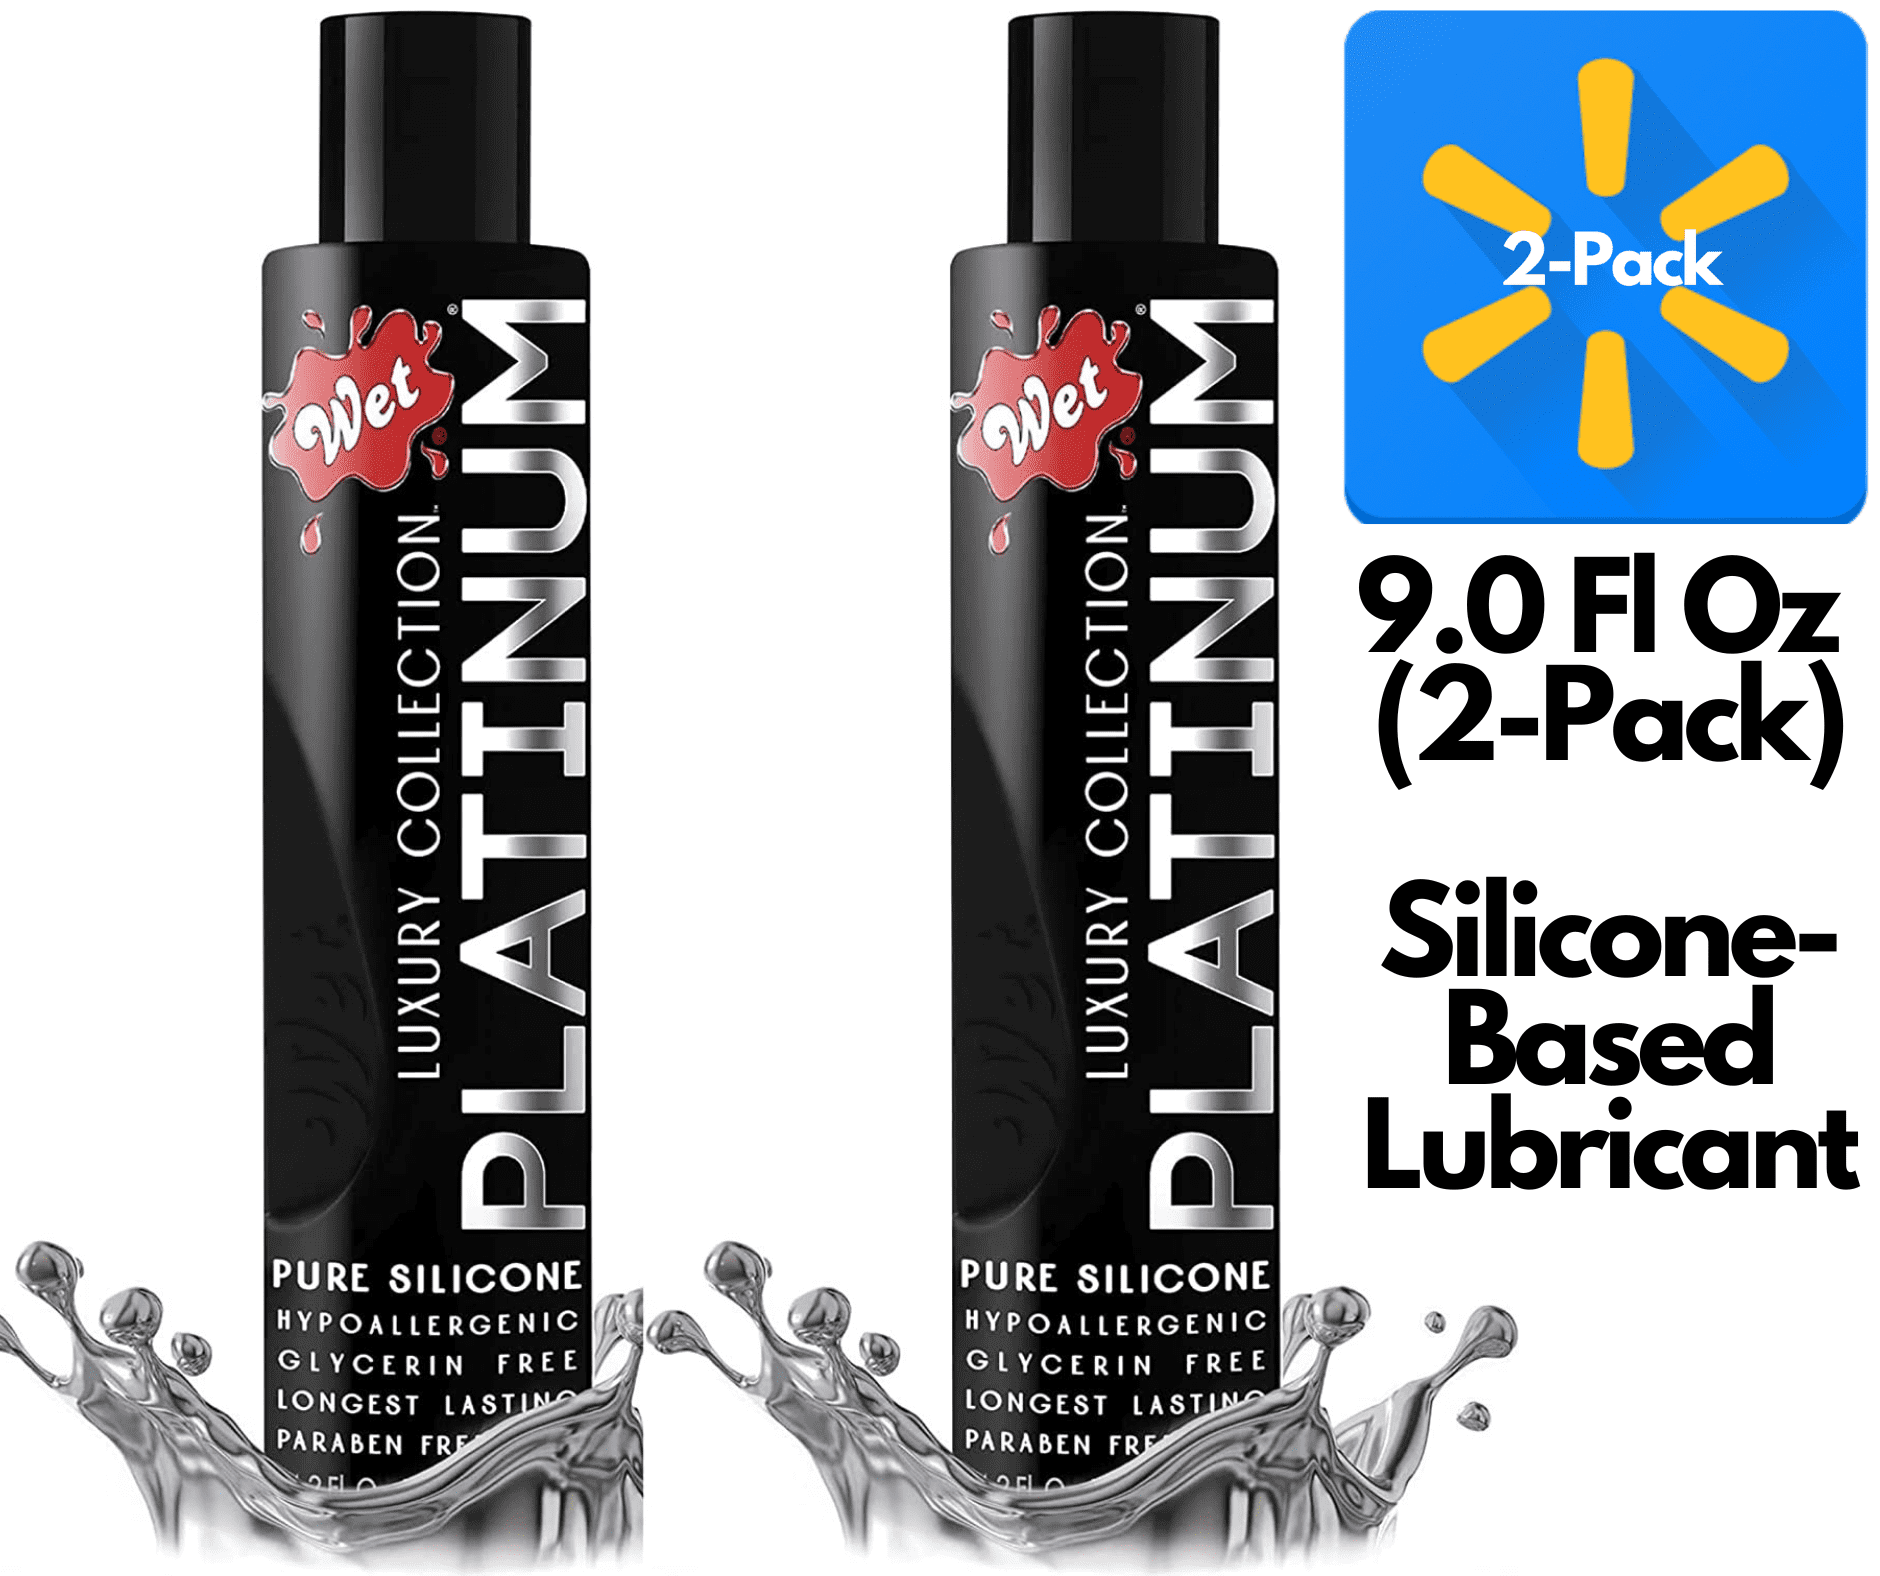 Wet Platinum Silicone Lubricant 9 0 Fl Oz 2 Pack Ultra Long